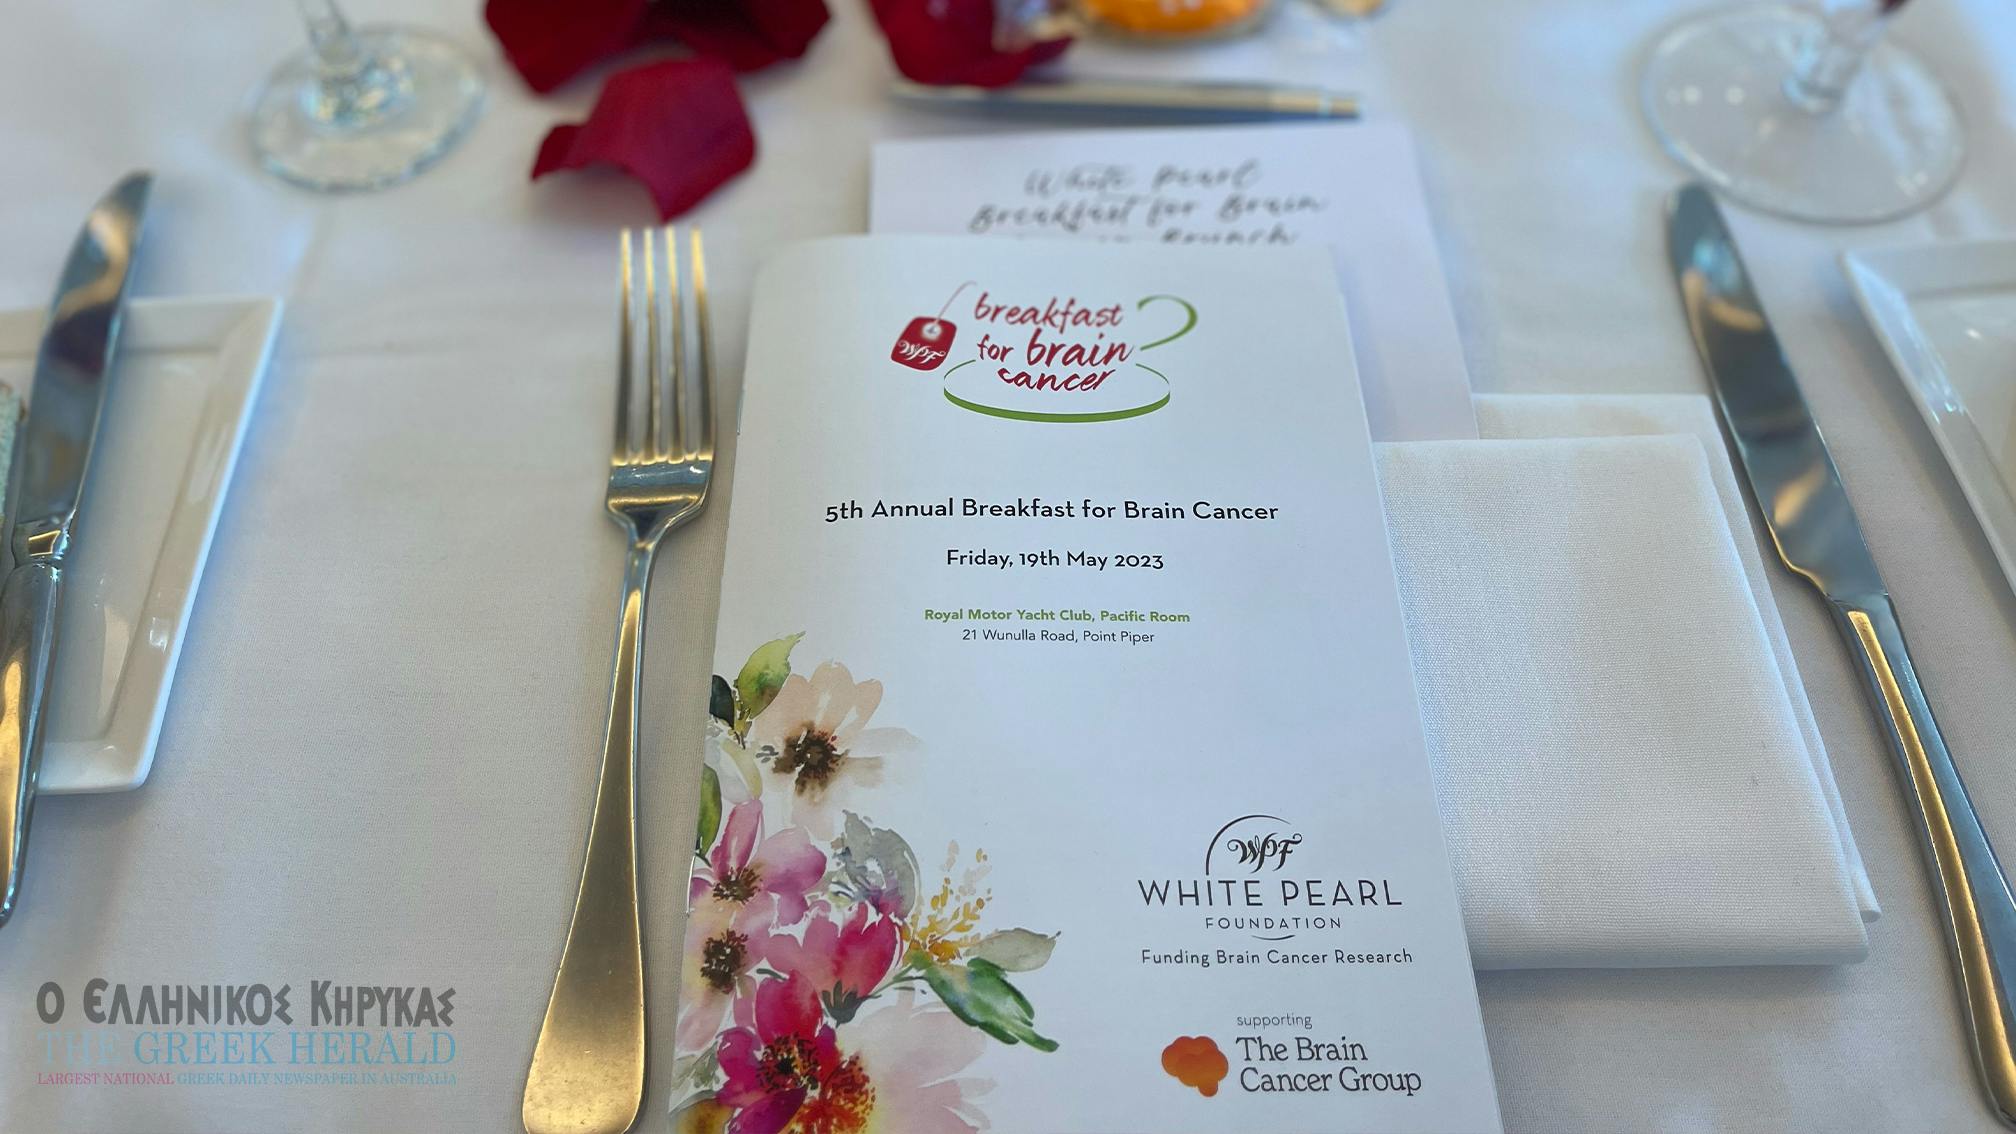 Media Release by the White Pearl Foundation. 5th Annual Breakfast for Brain Cancer